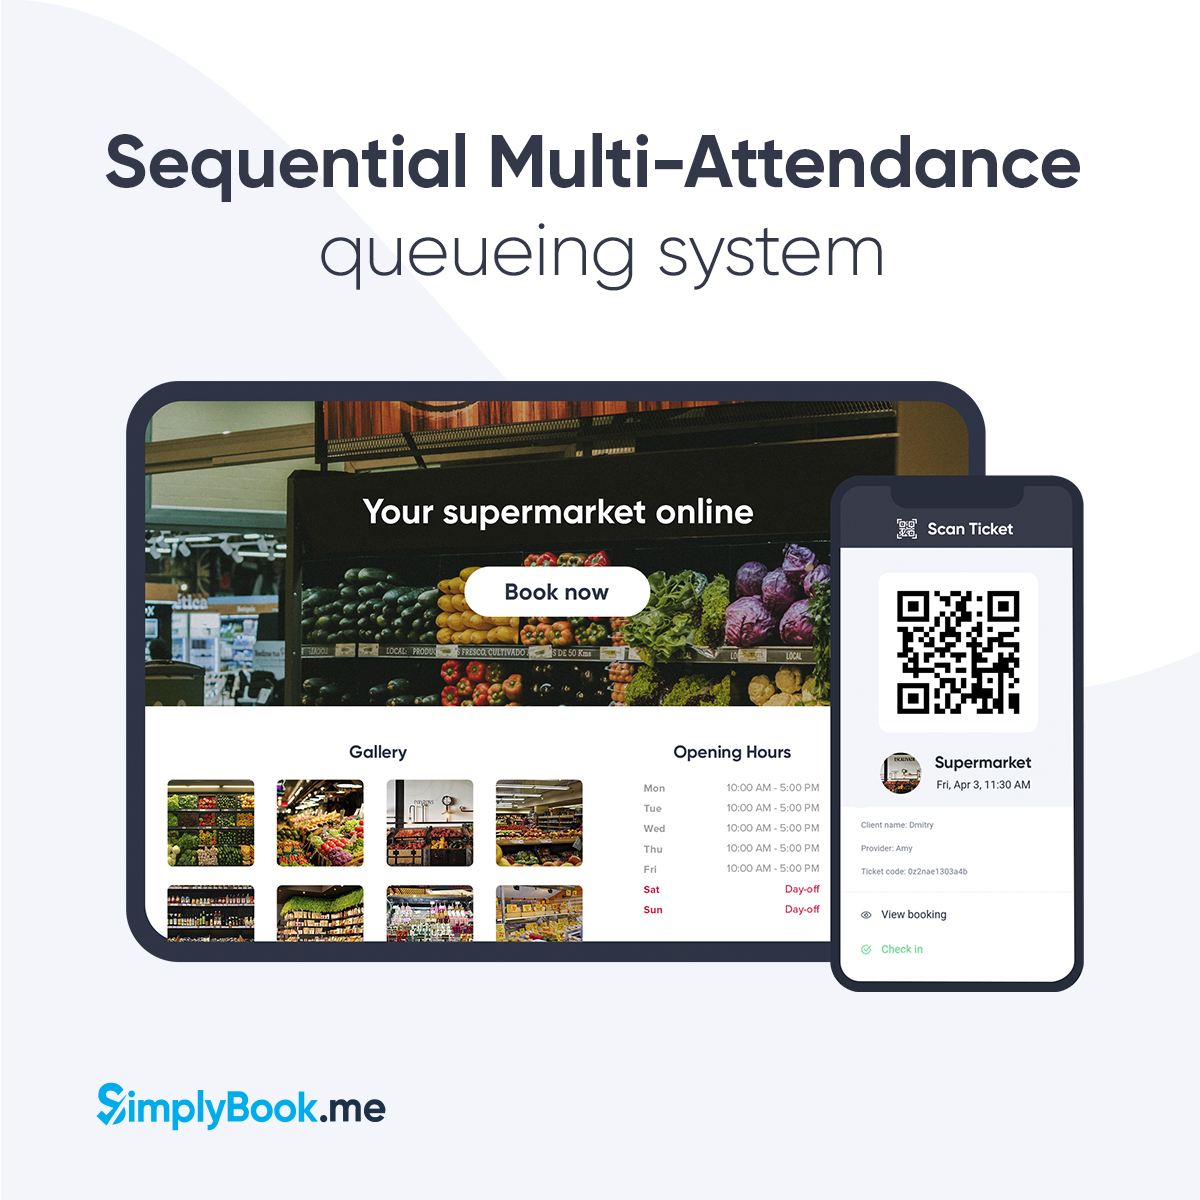 Sequential multi-attendance booking